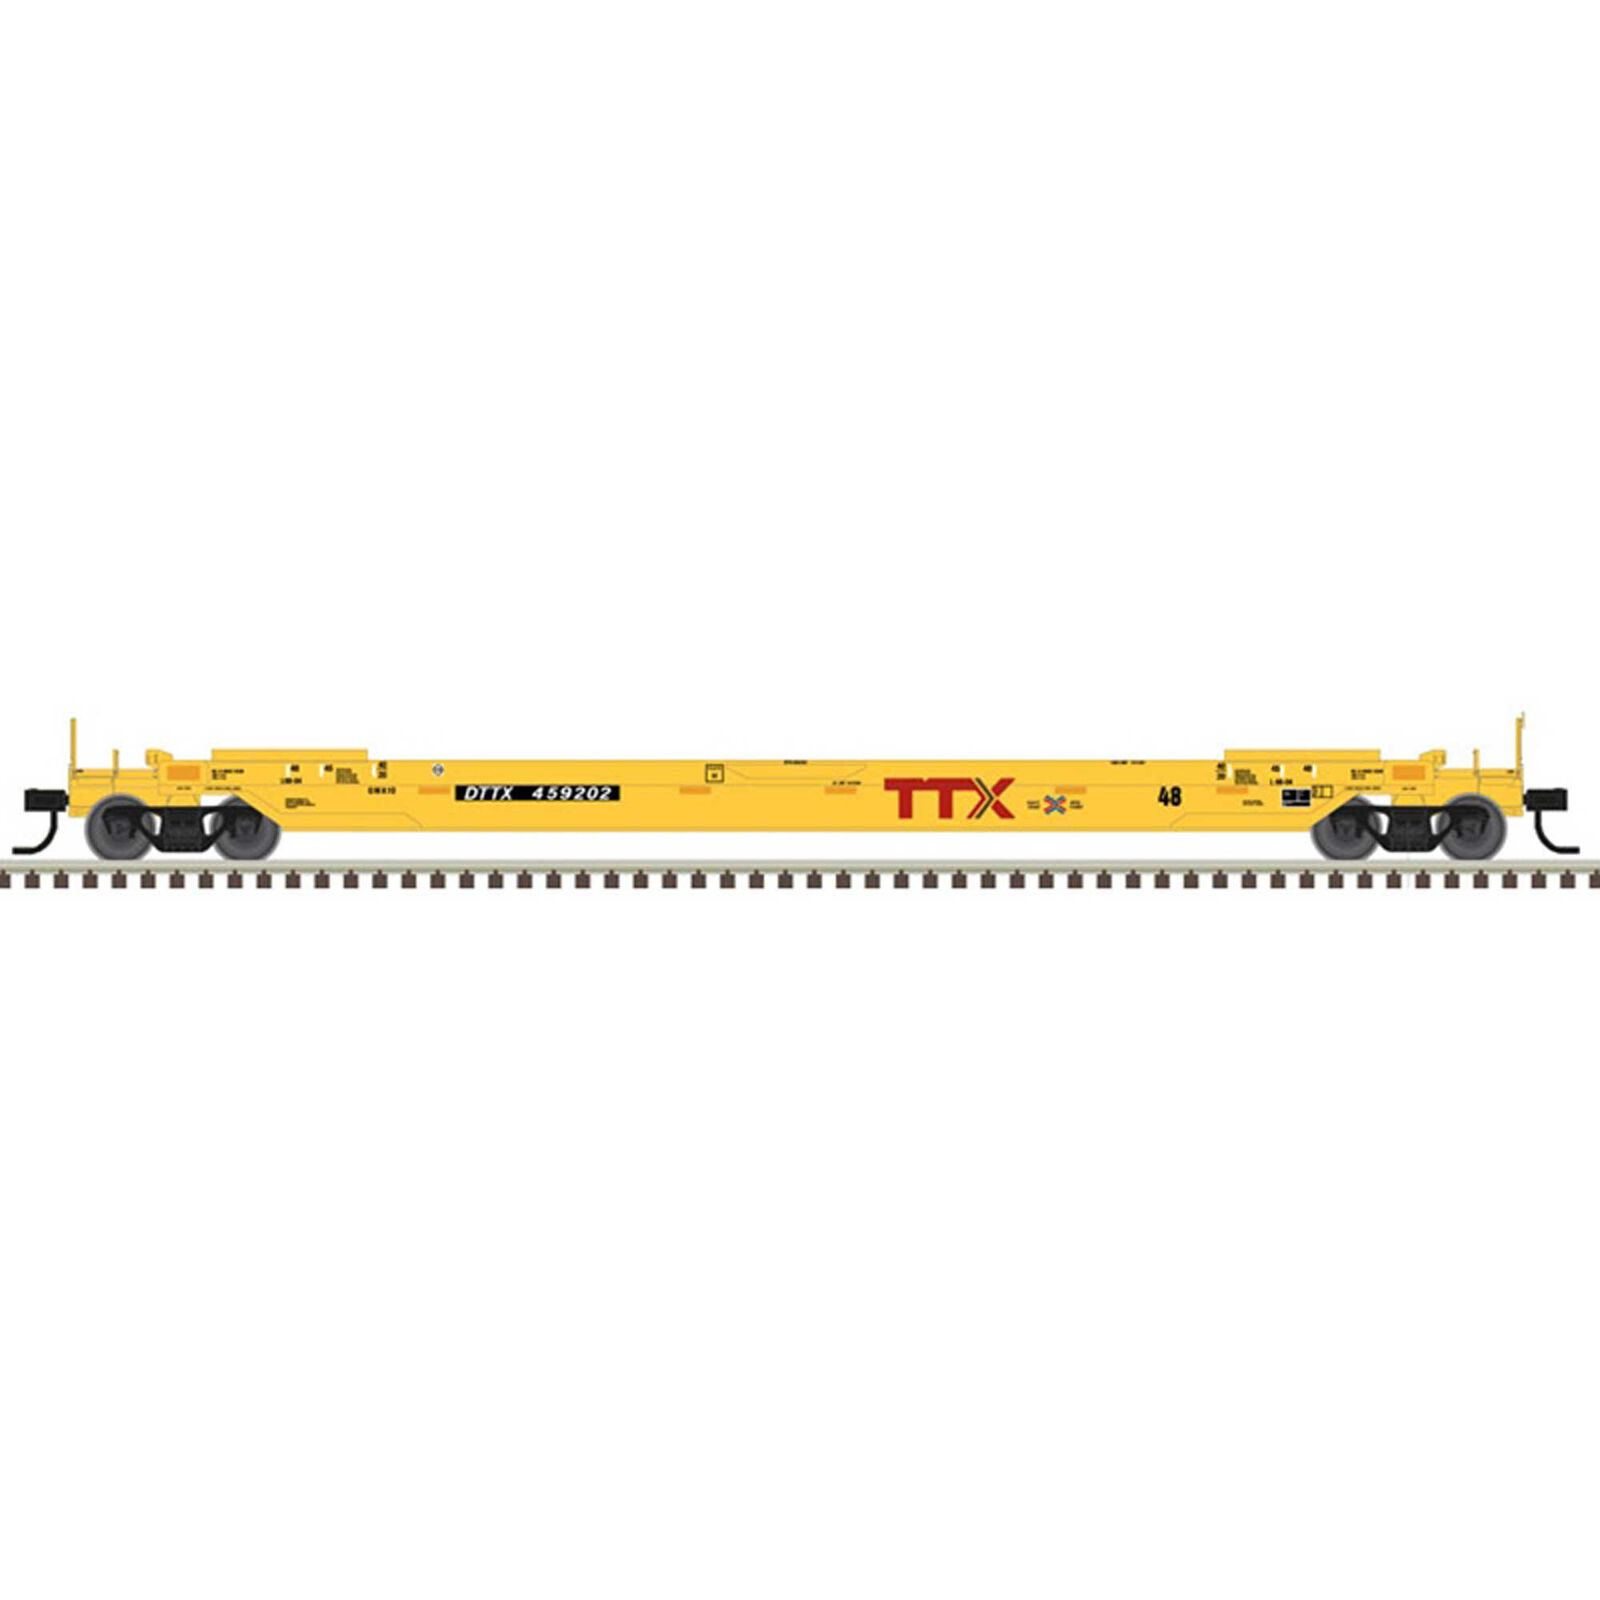 HO 48' Well Car TTX next load any road #456202, Yellow/Black/White